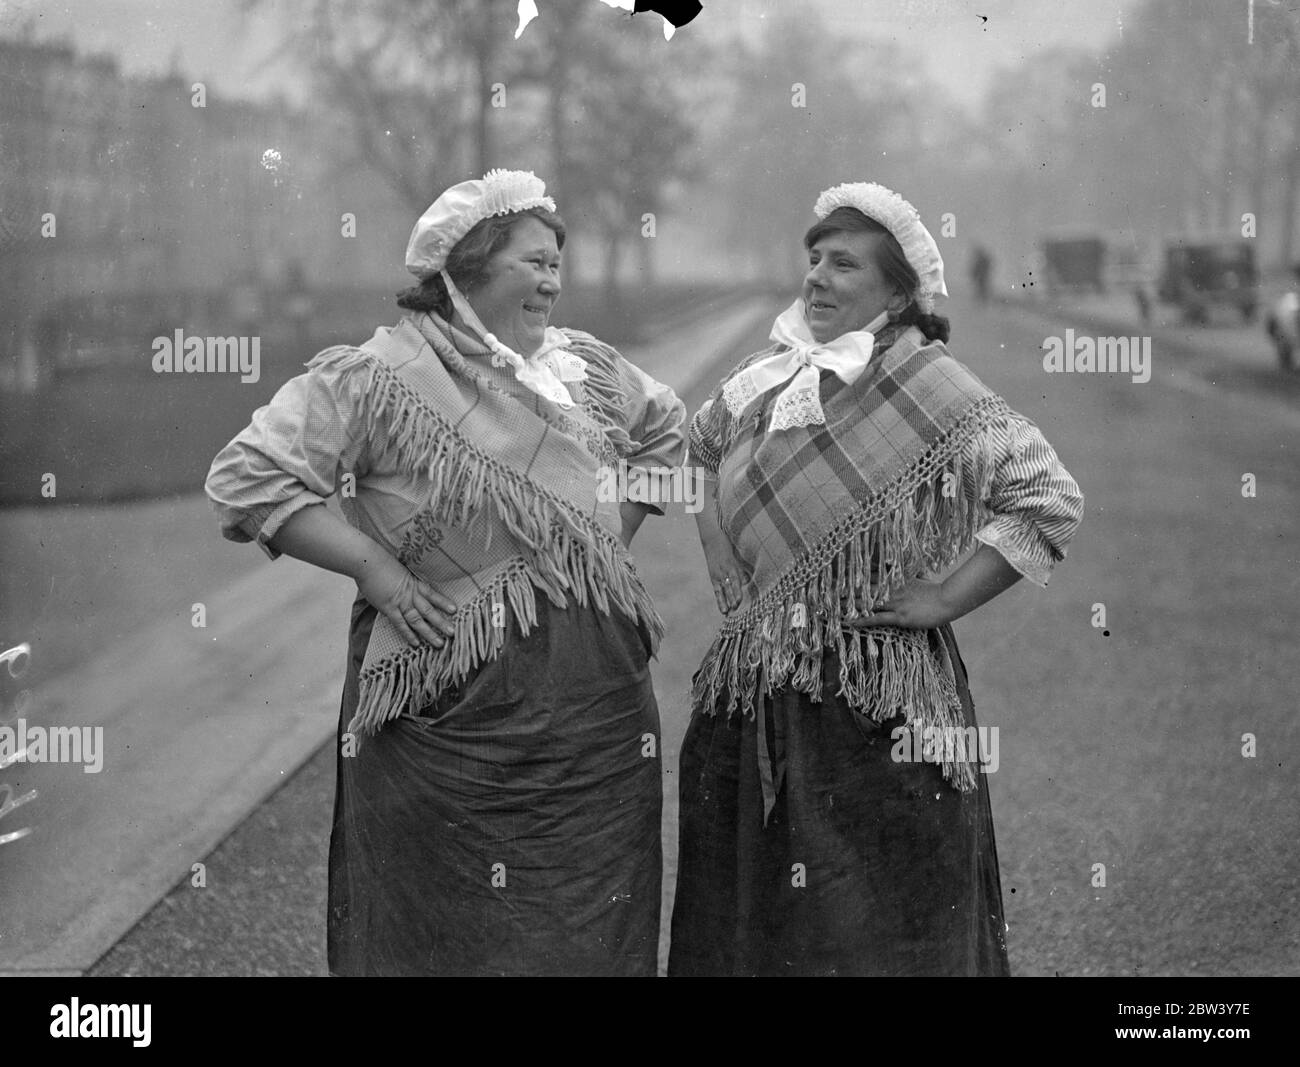 Belgian fisherfolk in London for Albert Hall reunion . A group of Belgian fisher folk in national costume are attending the Polytechnic Tours Reunion at the Royal Royal Albert Hall , London . This is their first visit to London . Photo shows , two typical women members of the party photographed in London . 6 March 1937 Stock Photo